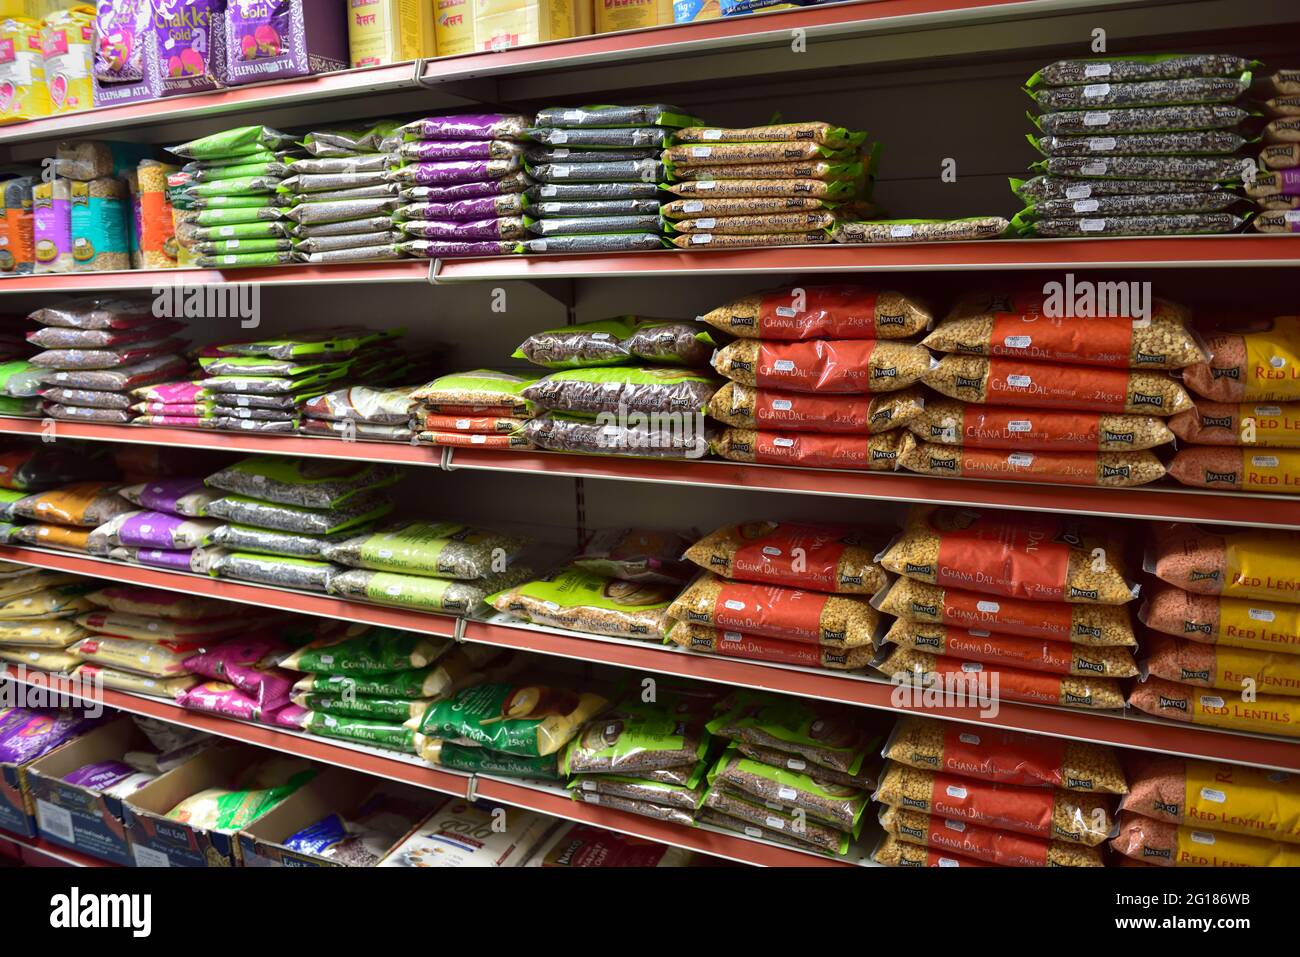 Shopper looking at bags of dried beans and lentils in small local well stocked corner grocery shop, UK Stock Photo